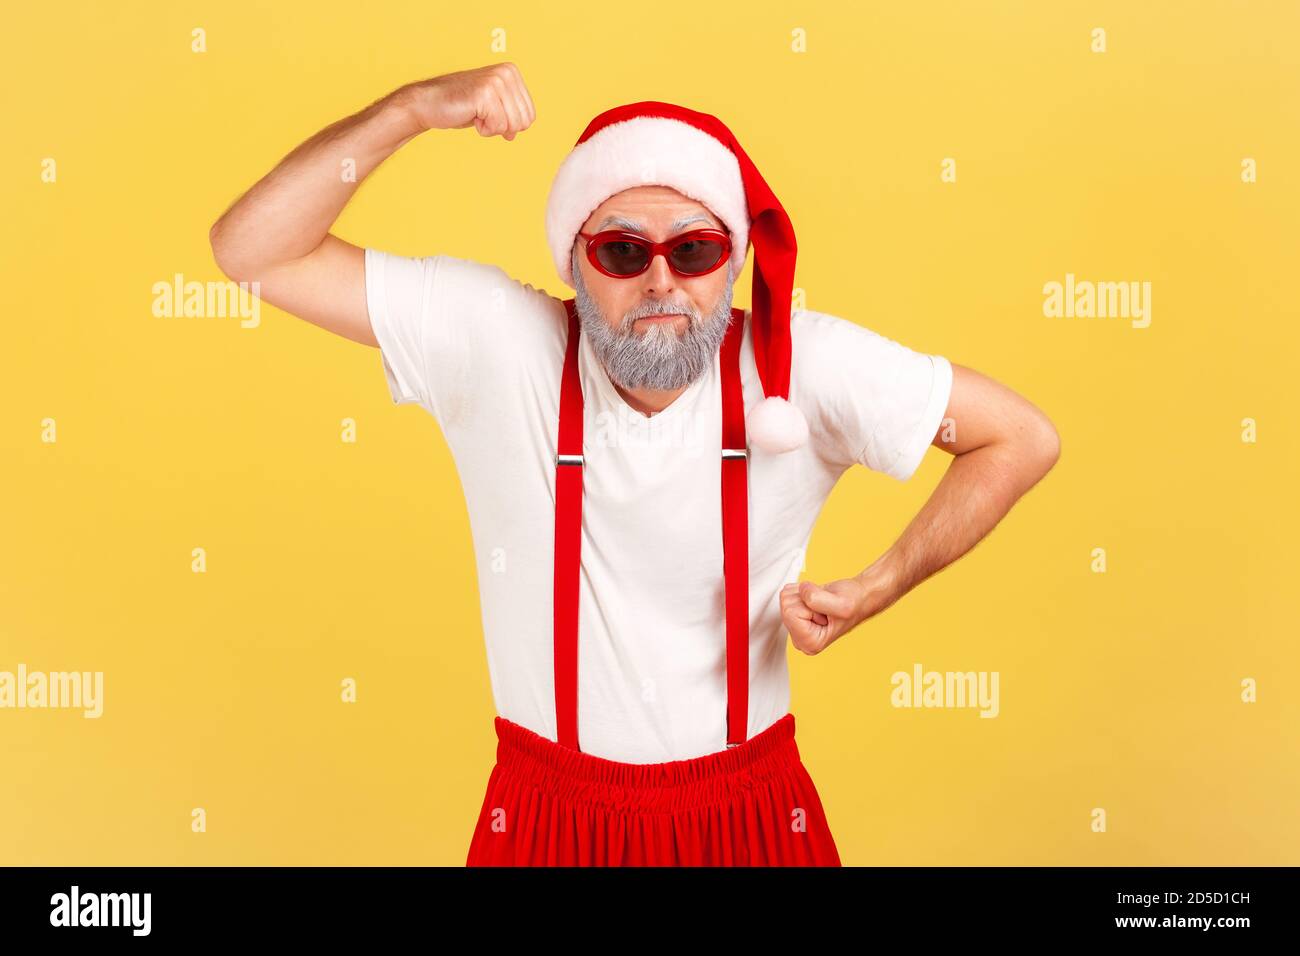 Funny grumpy man in santa claus hat and pants with suspenders showing his arm muscles seriously looking at camera through red stylish sunglasses. Indo Stock Photo